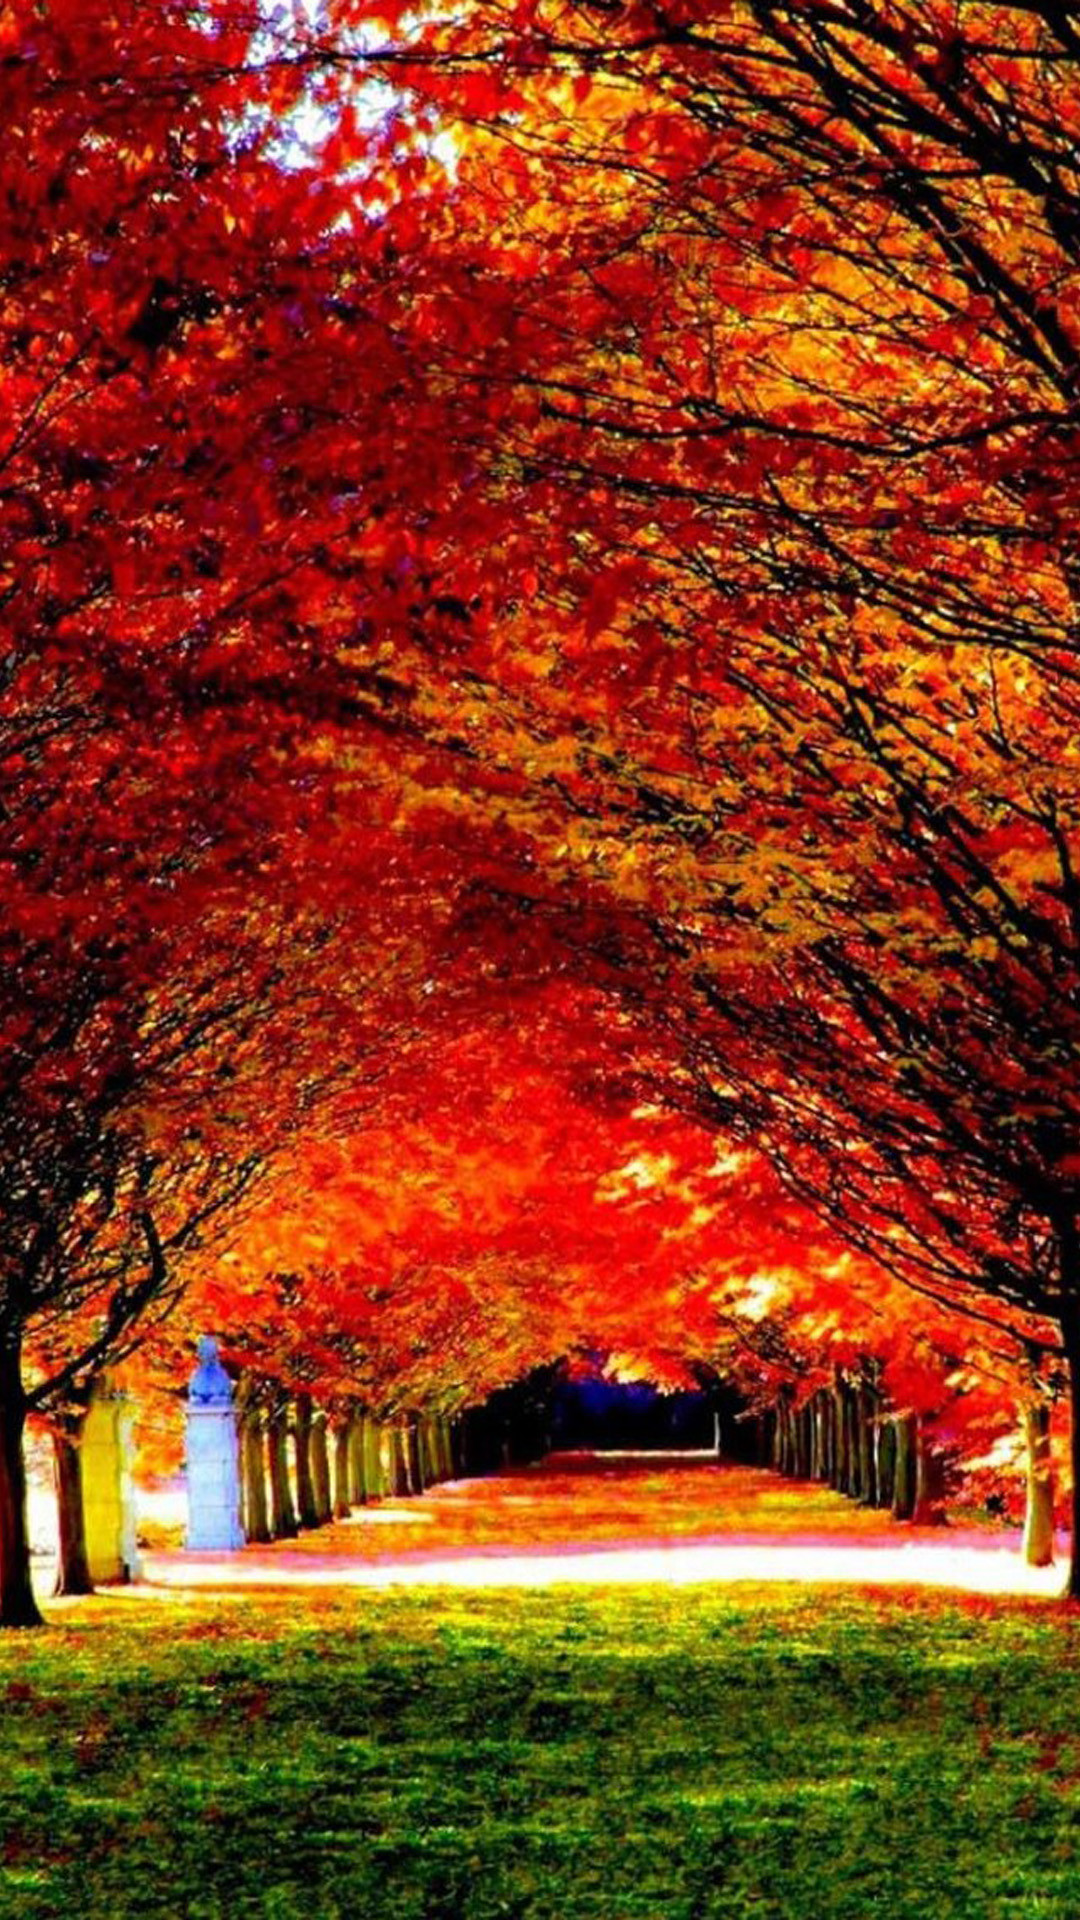 Nature Red Trees Road Iphone 6 Wallpaper Download Iphone Wallpapers Ipad Wallpapers One Stop Download Iphone12 スマホ壁紙 待受画像ギャラリー